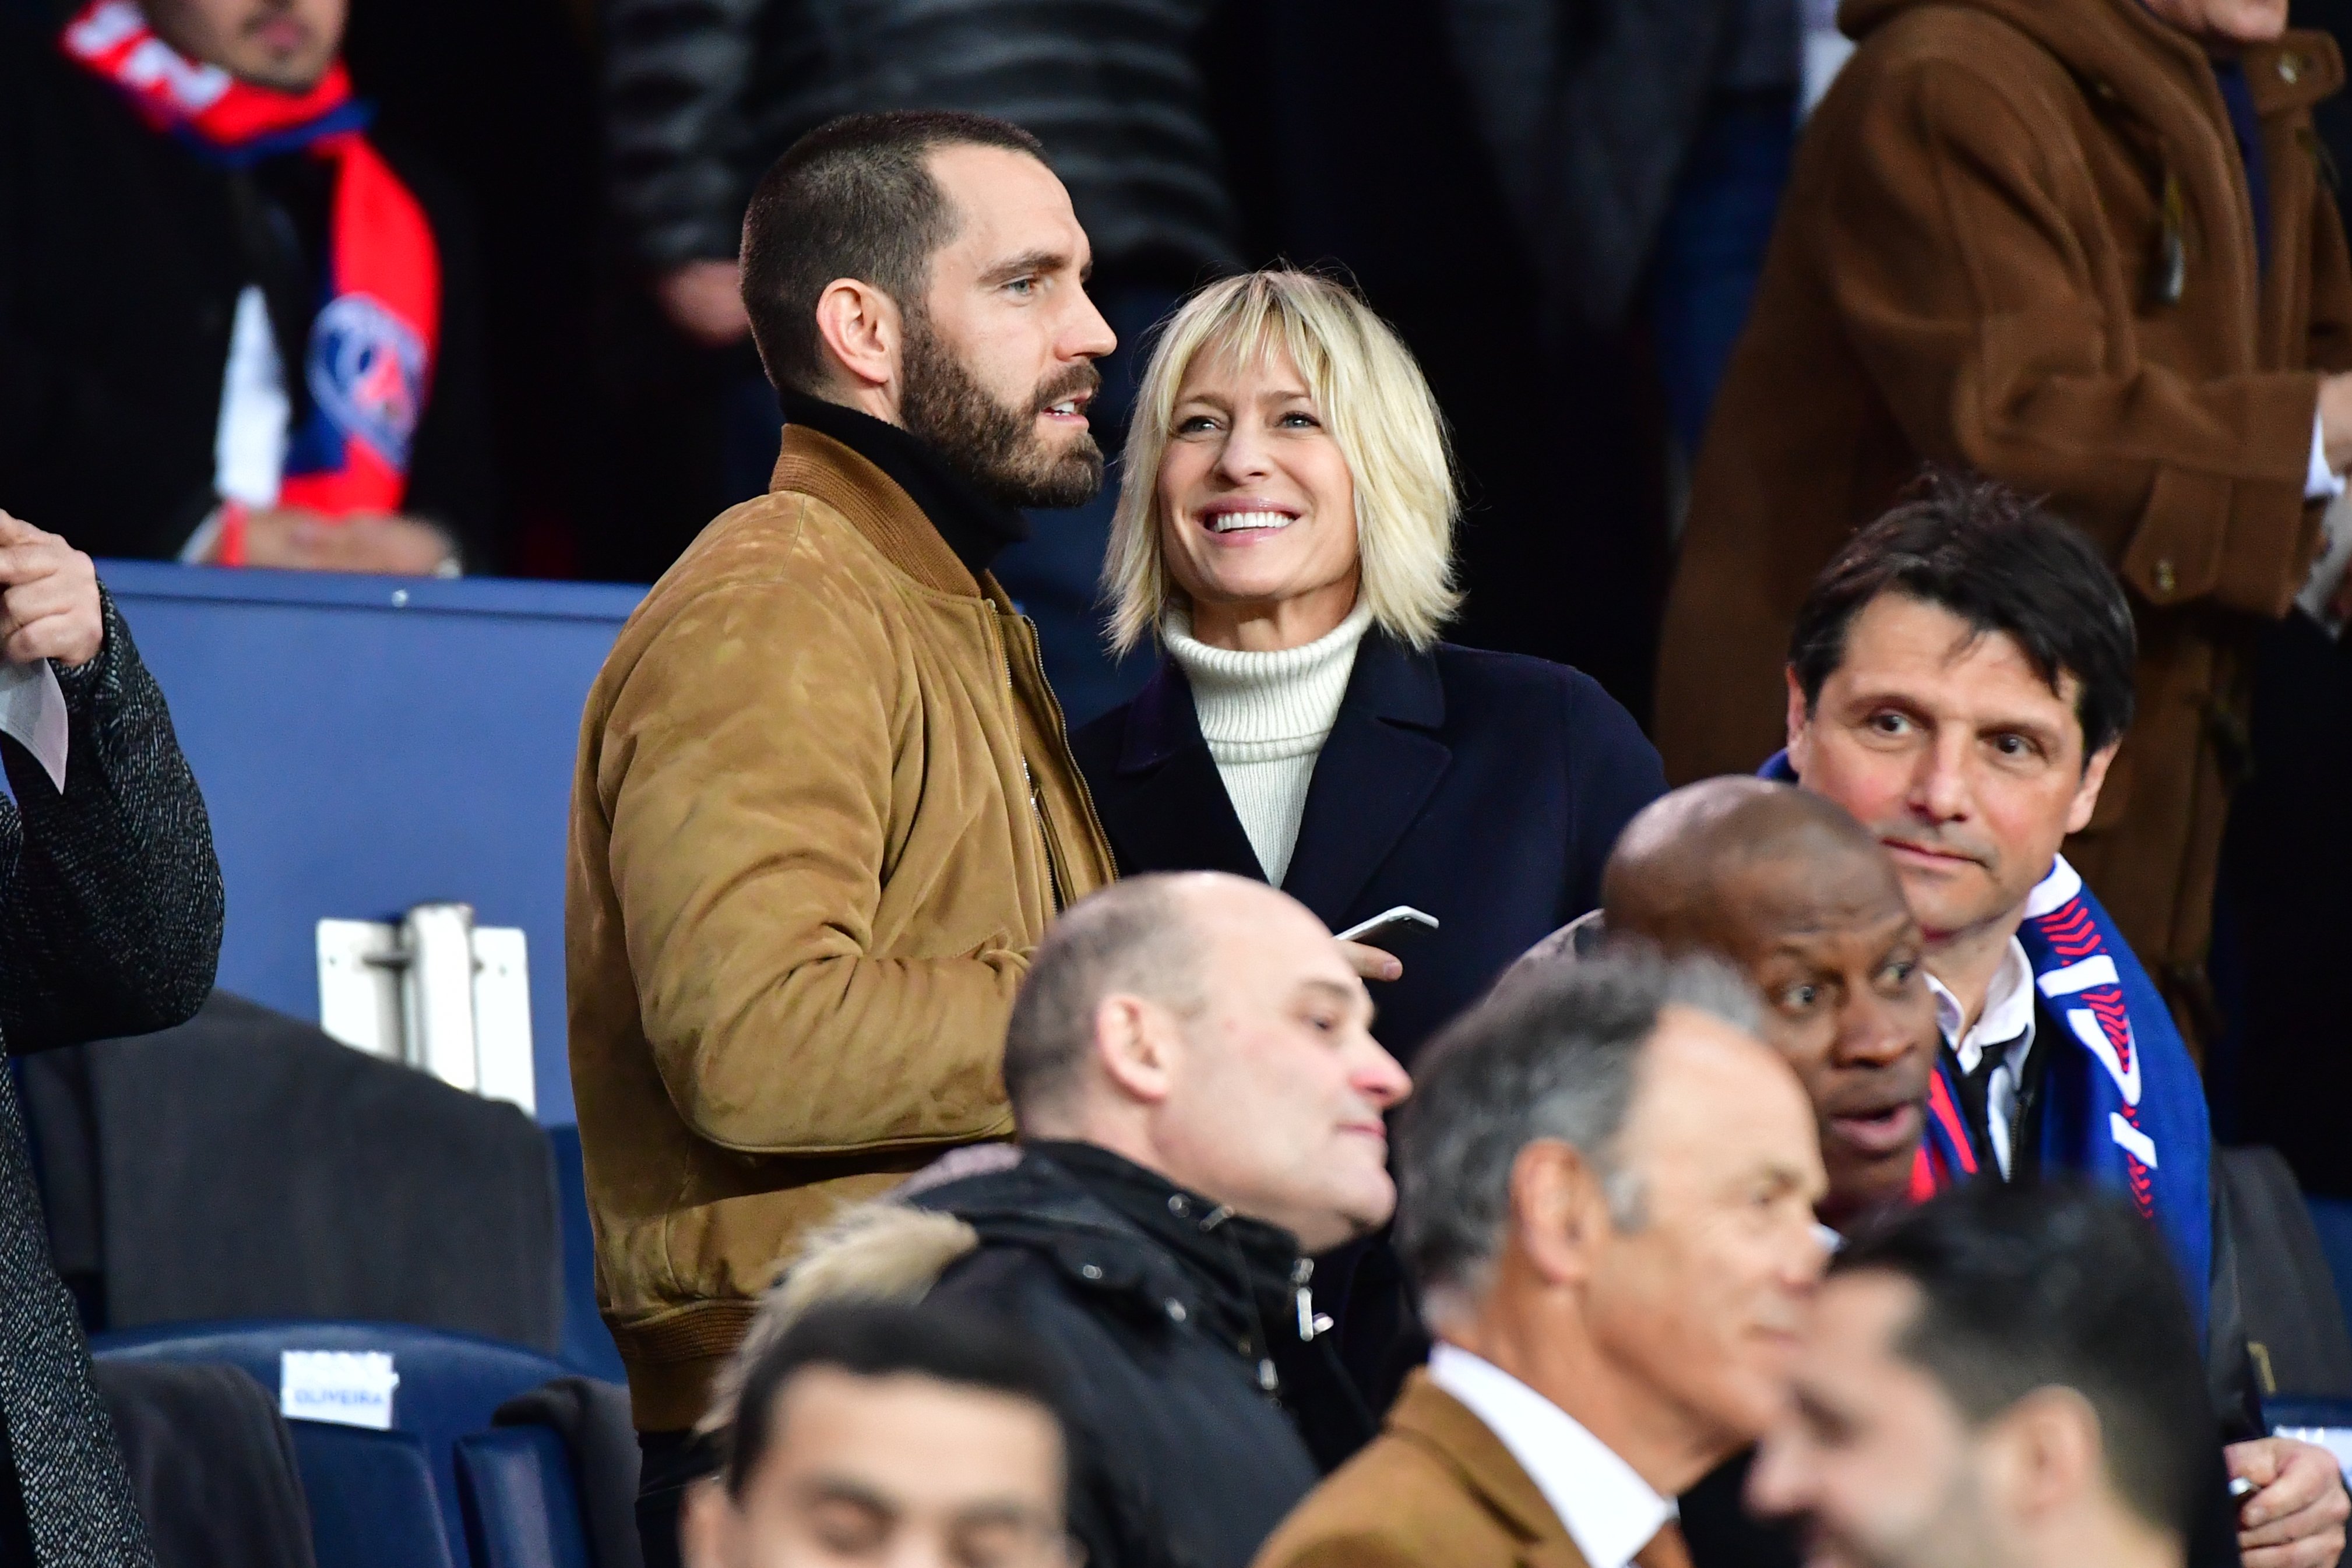 Robin Wright and Clement Giraudet at the second leg of UEFA Champions League match between Paris Saint Germain and Real Madrid at Parc des Princes on March 6, 2018 in Paris, France. | Photo: Getty Images